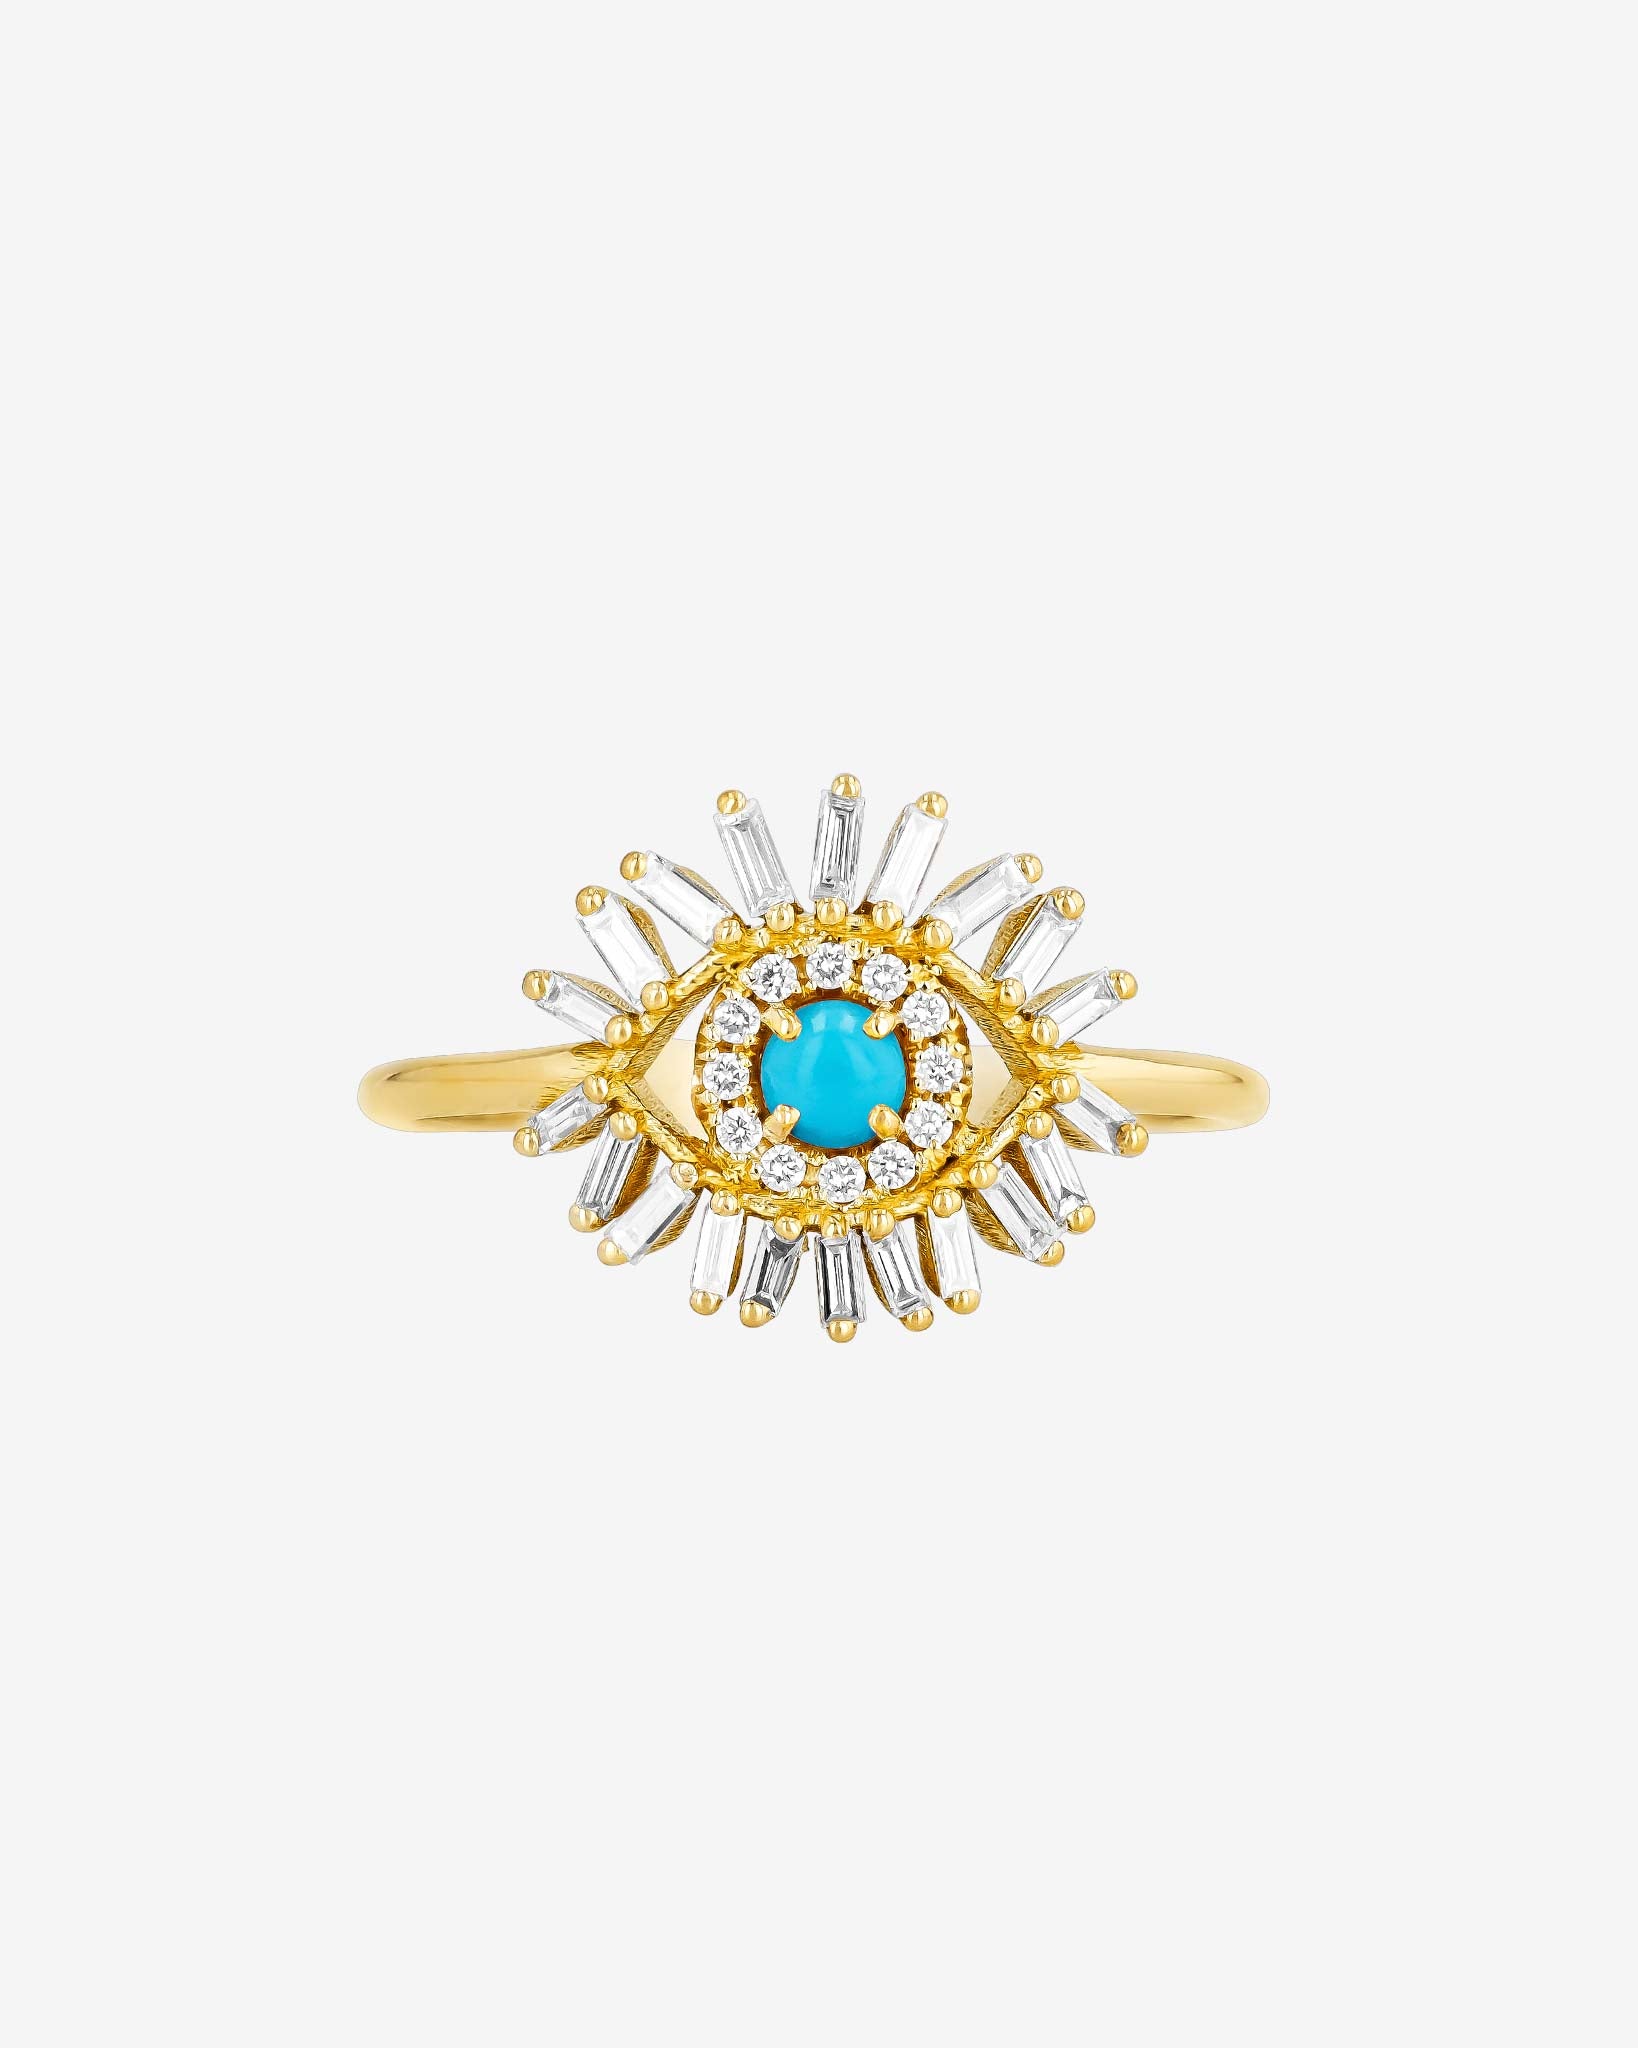 Shop Rings for Women and Girls Online | Suzanne Kalan® – Page 6